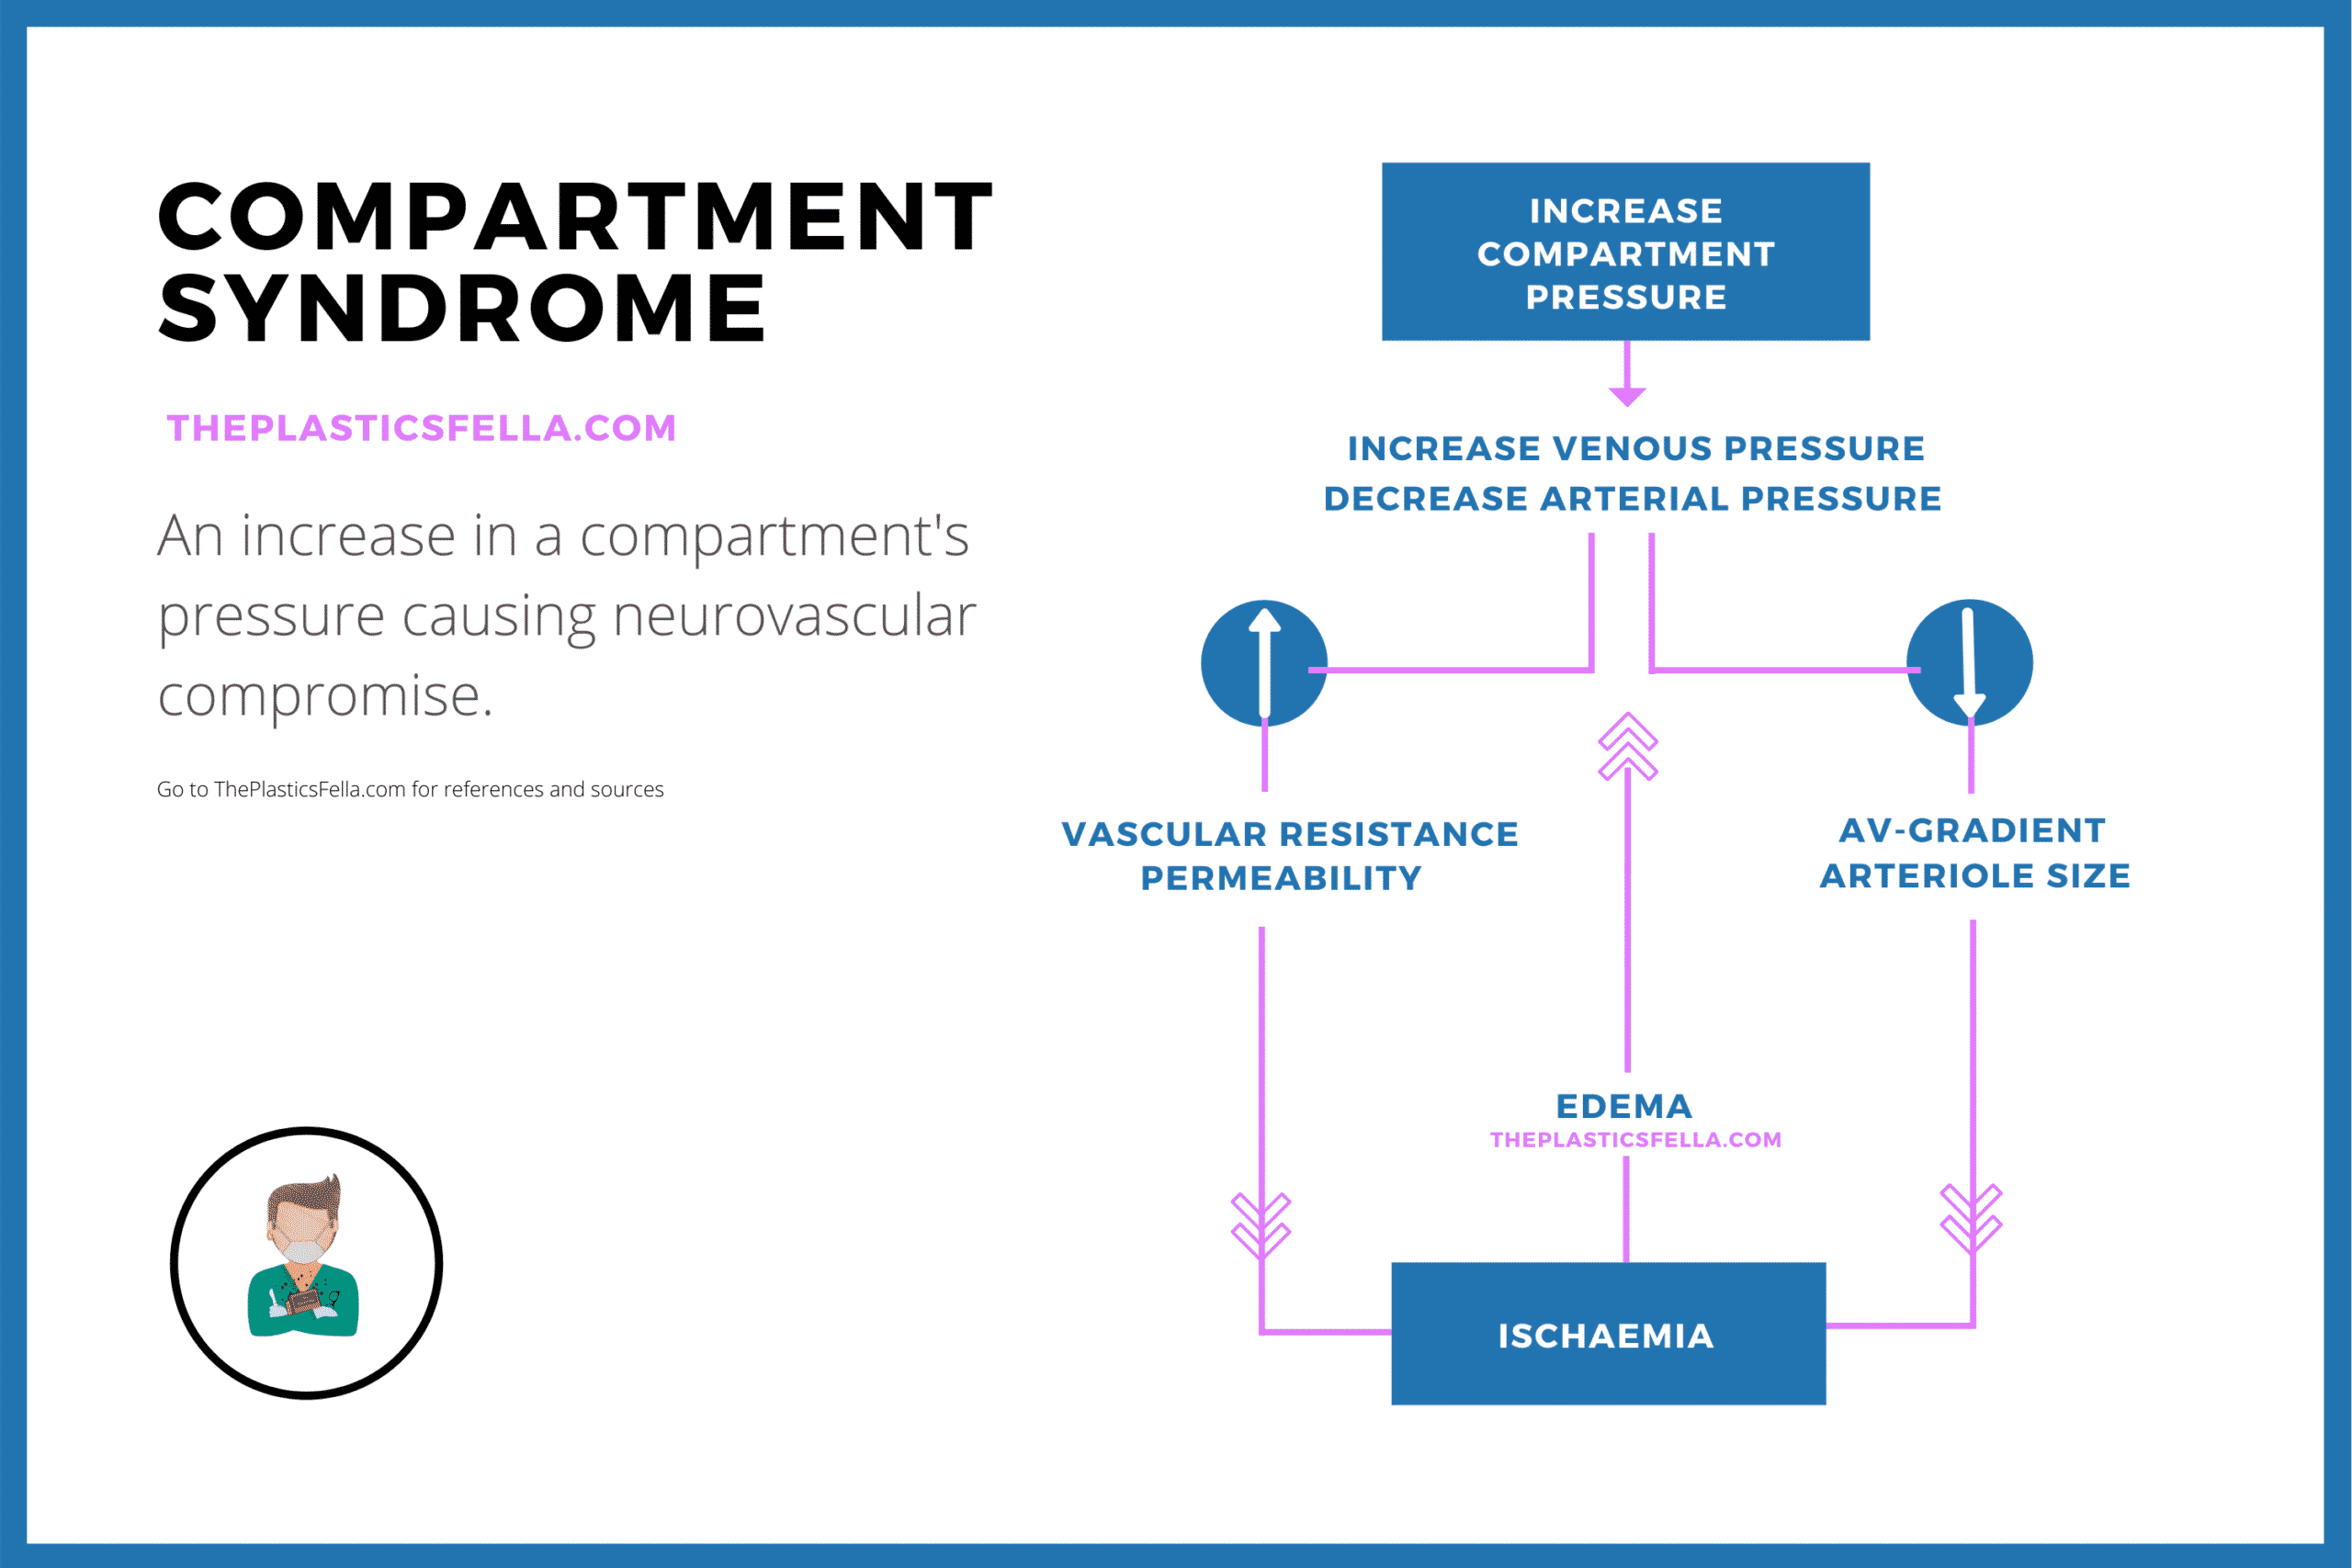 https://www.theplasticsfella.com/content/images/2021/03/Blue-and-Pink-Customer-Support-Flowchart.png